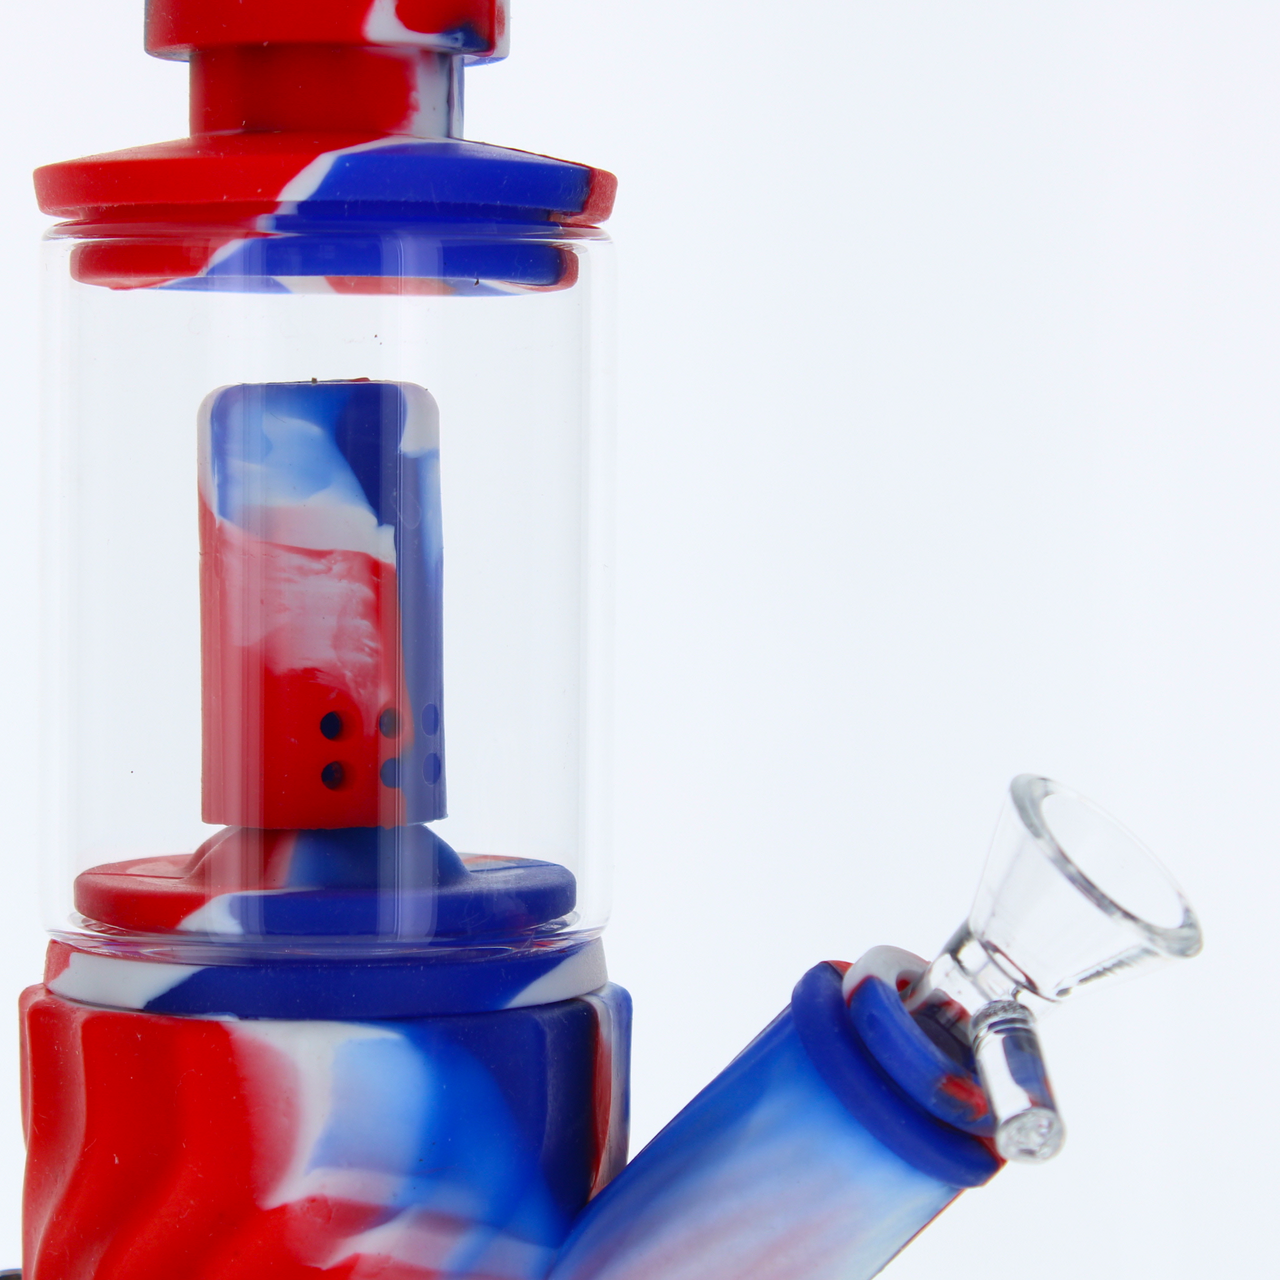 11 4 in 1 Silicone Glass Hybrid Water Pipe, Nectar Collector